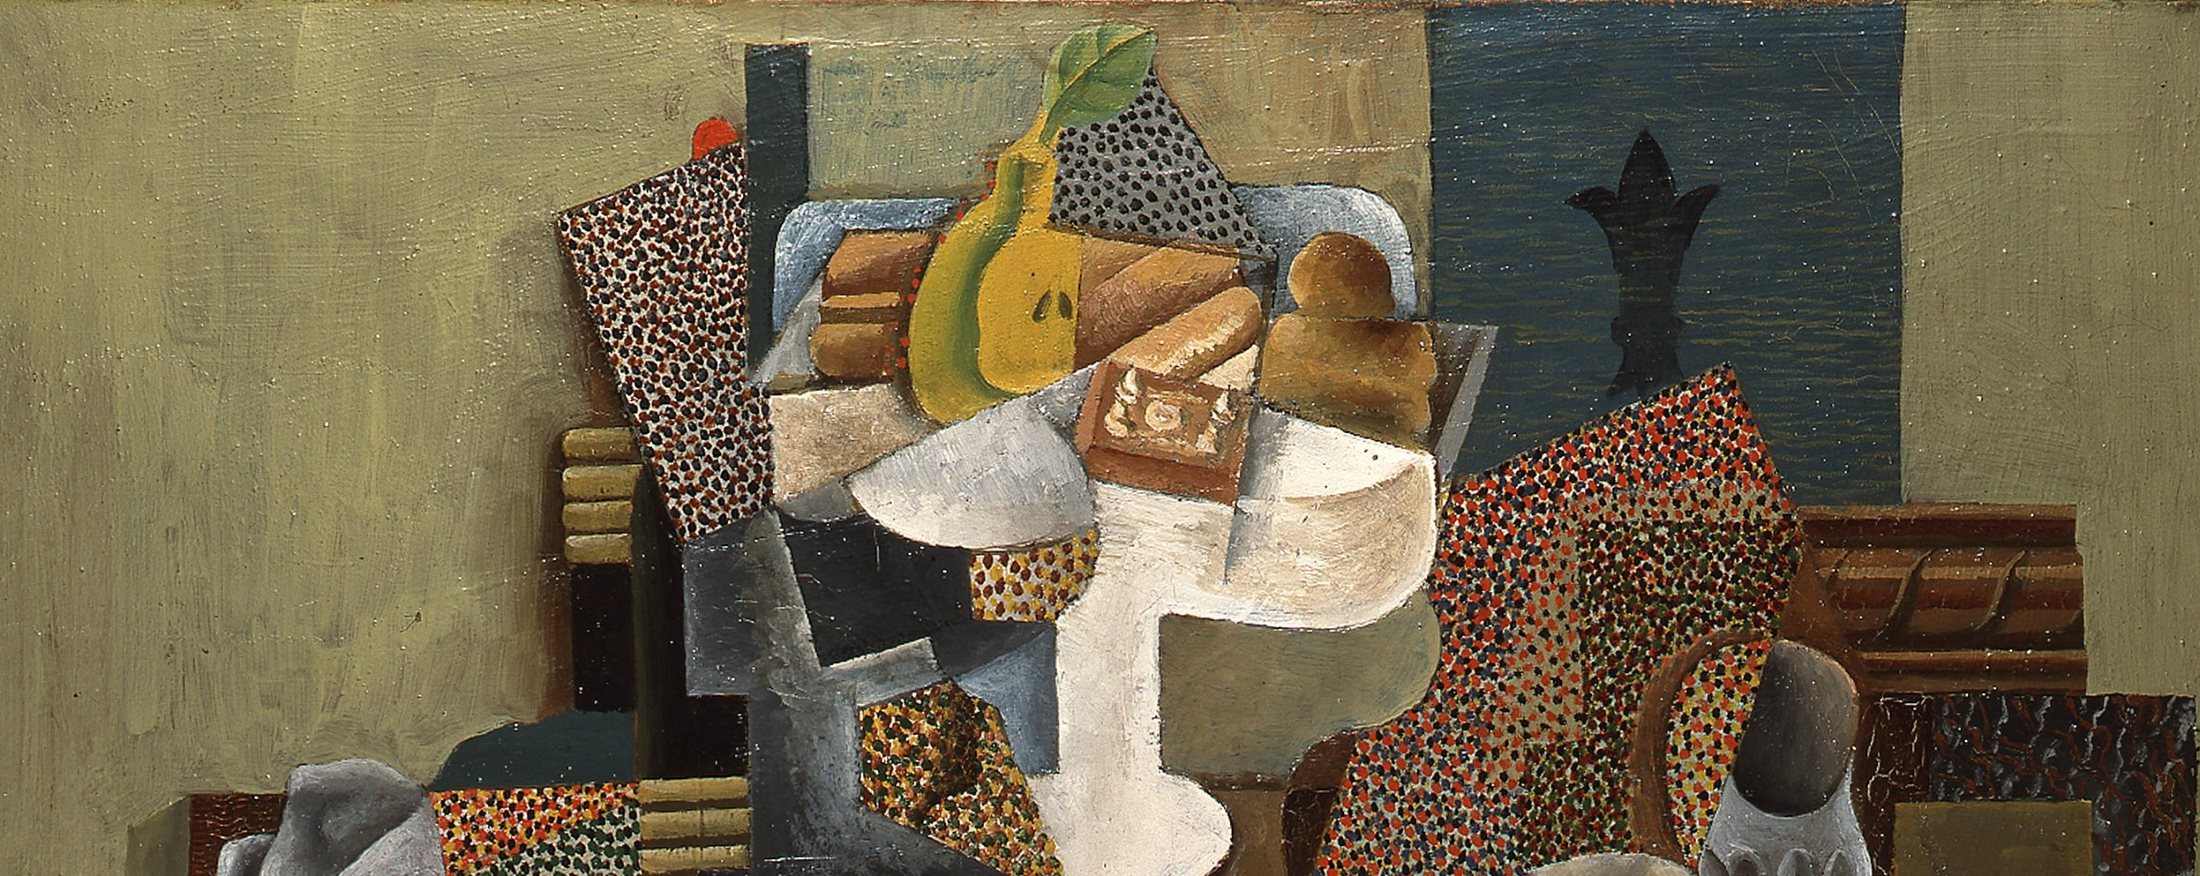 picasso still life with chair caning